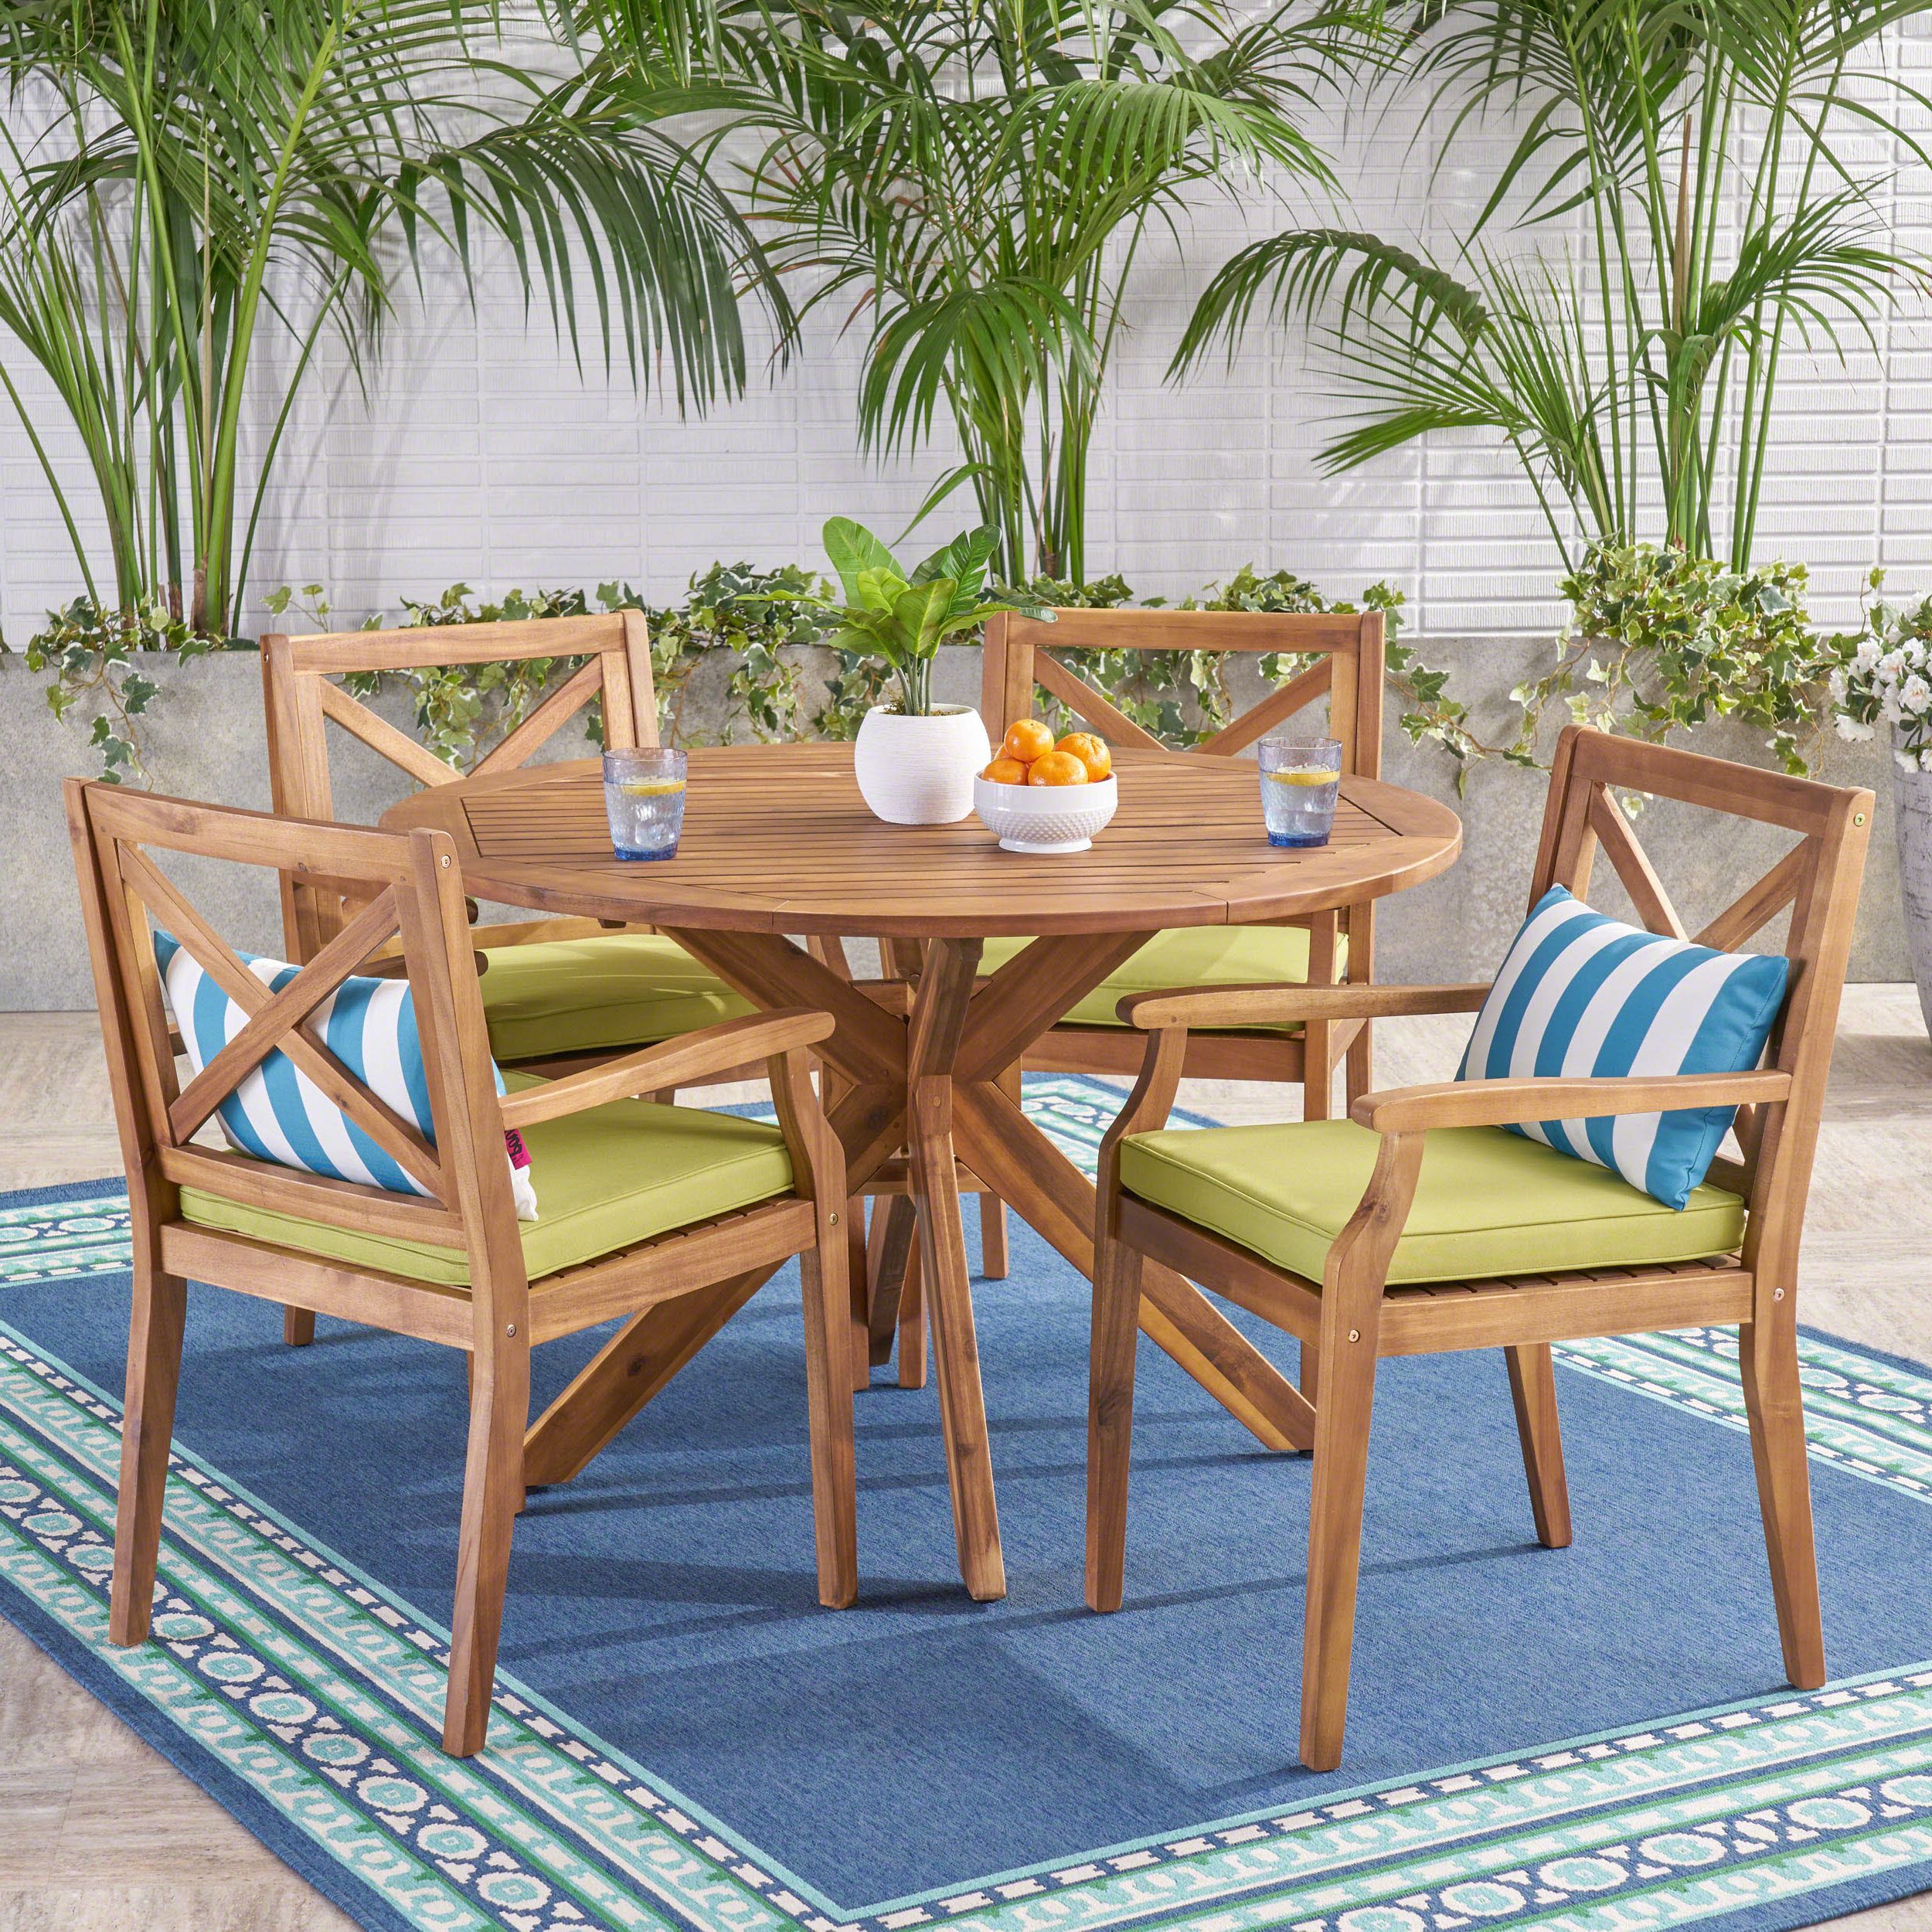 5 Piece Patio Dining Set Pertaining To Latest Oakley Outdoor 5 Piece Acacia Wood Round Dining Set With Cushions, Teak (View 1 of 15)